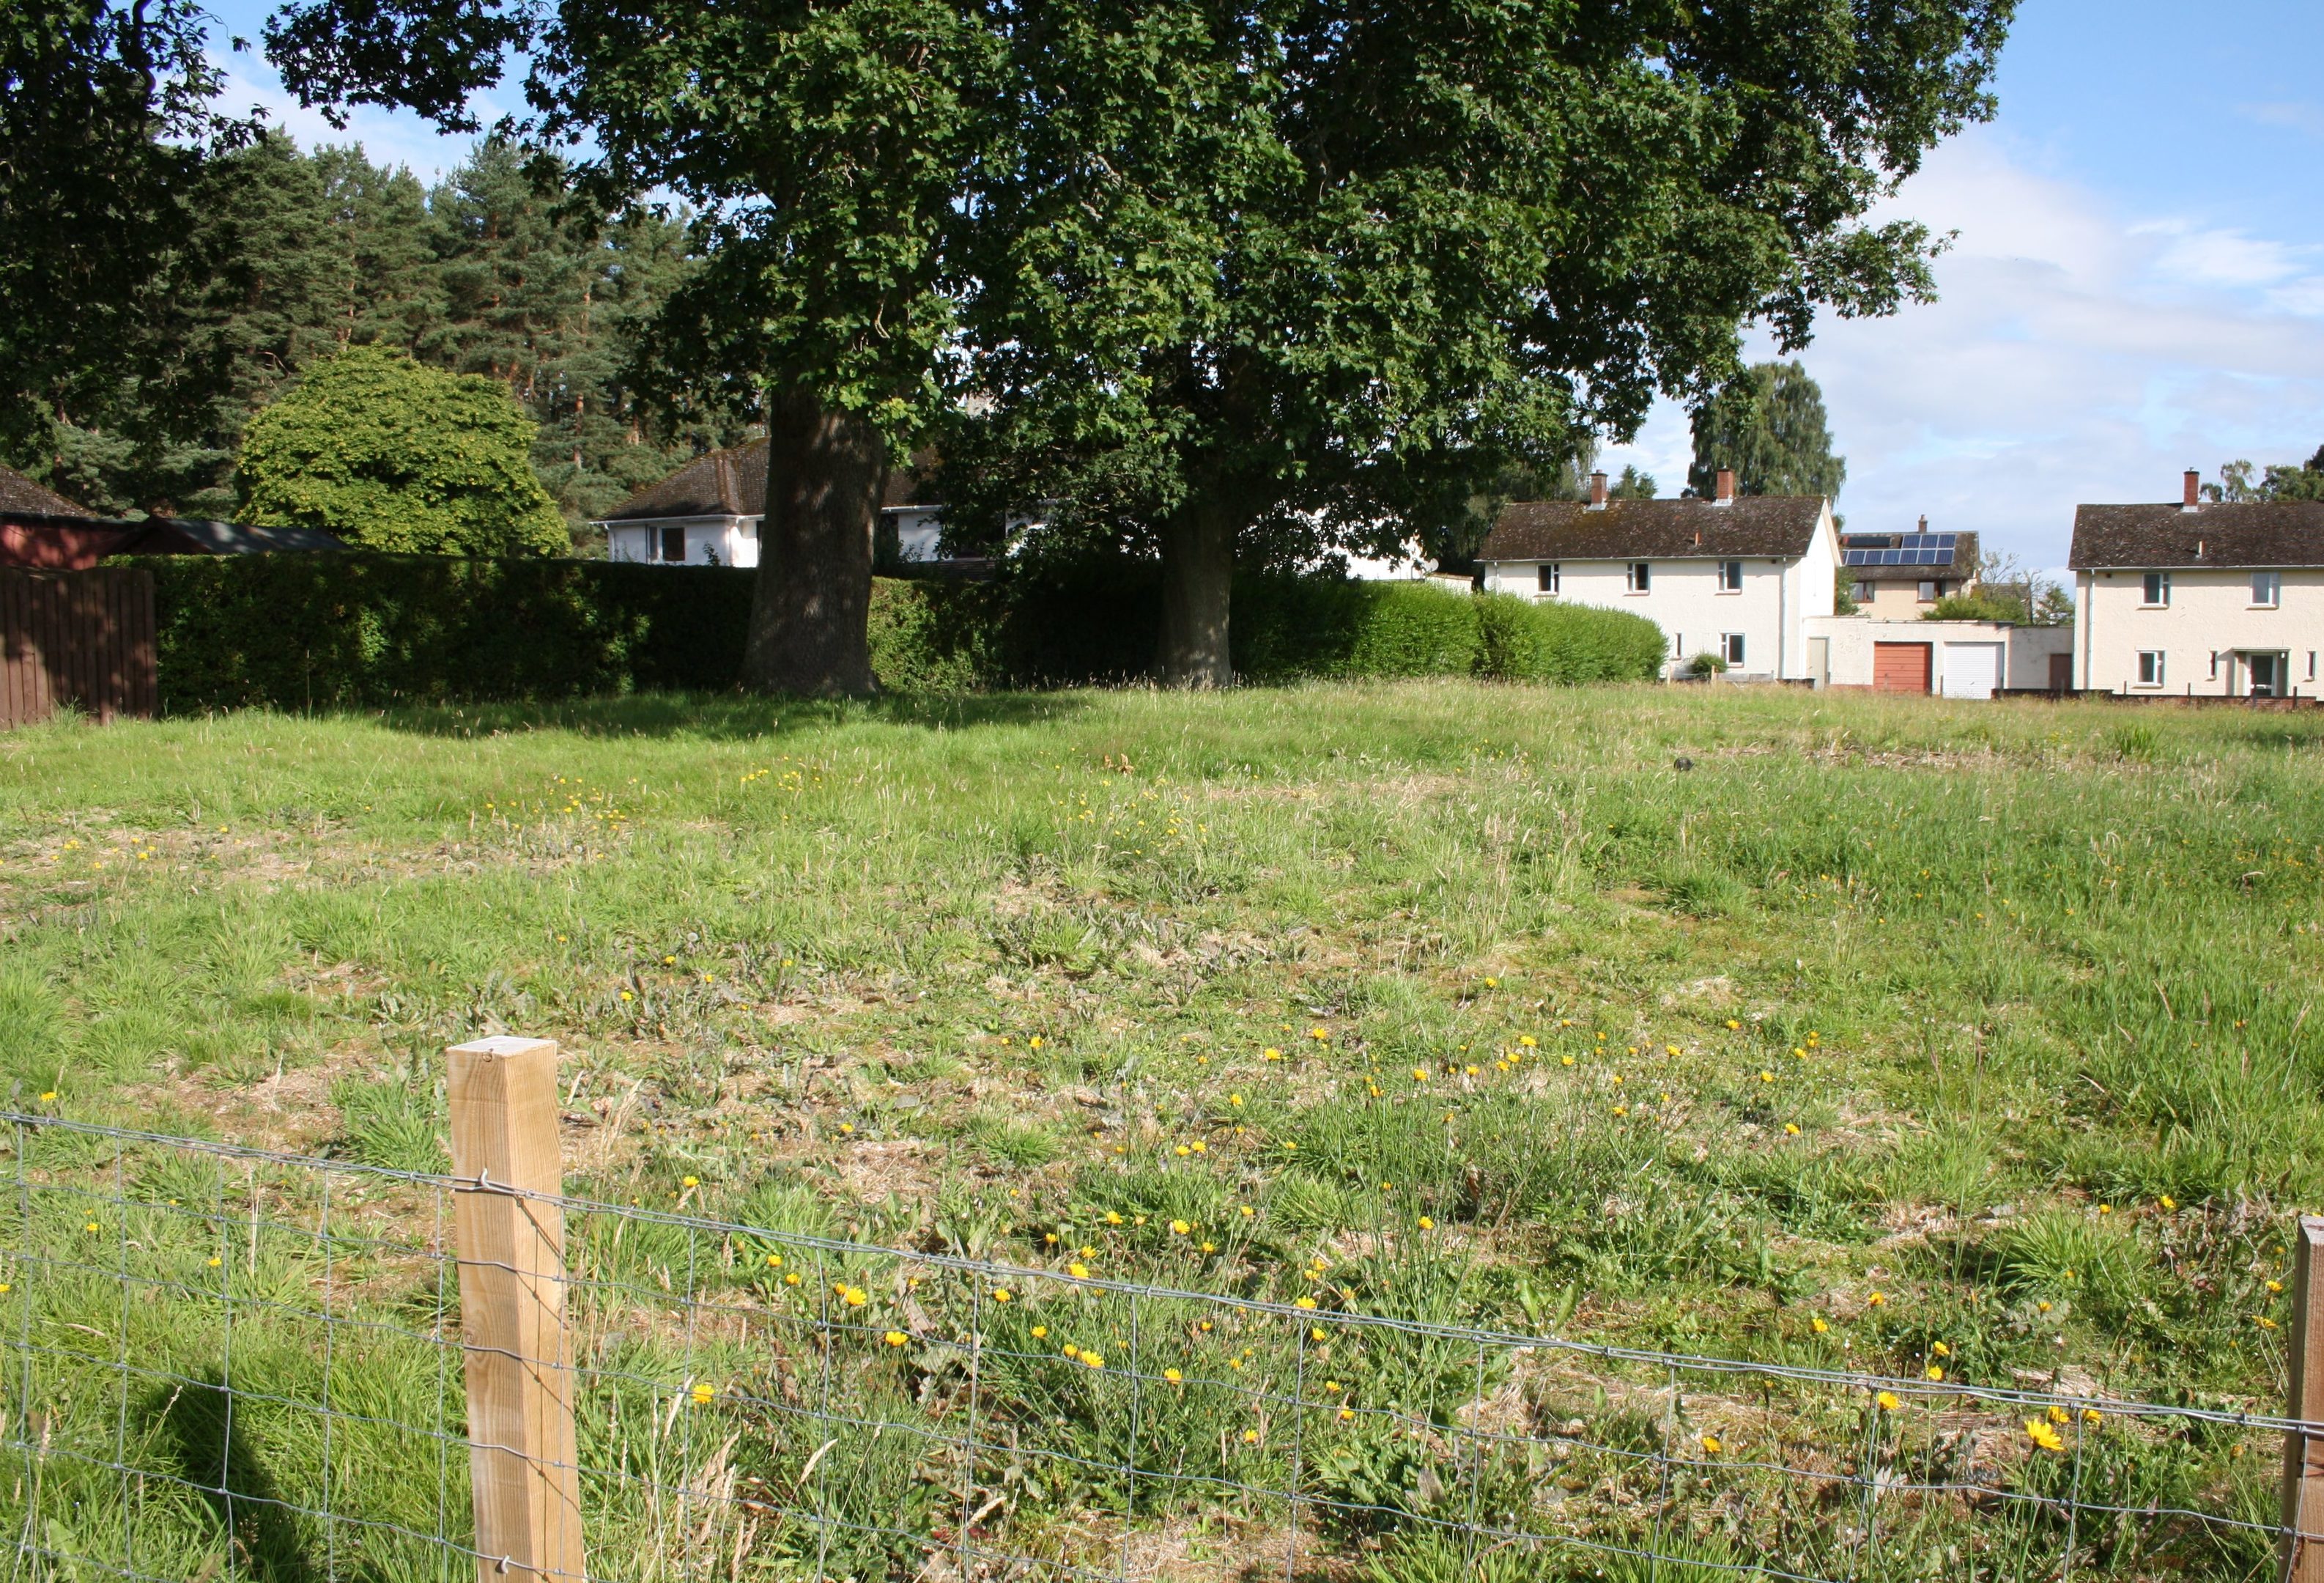 The land at Woollcombe Square, Scone, which the community would like to buy.